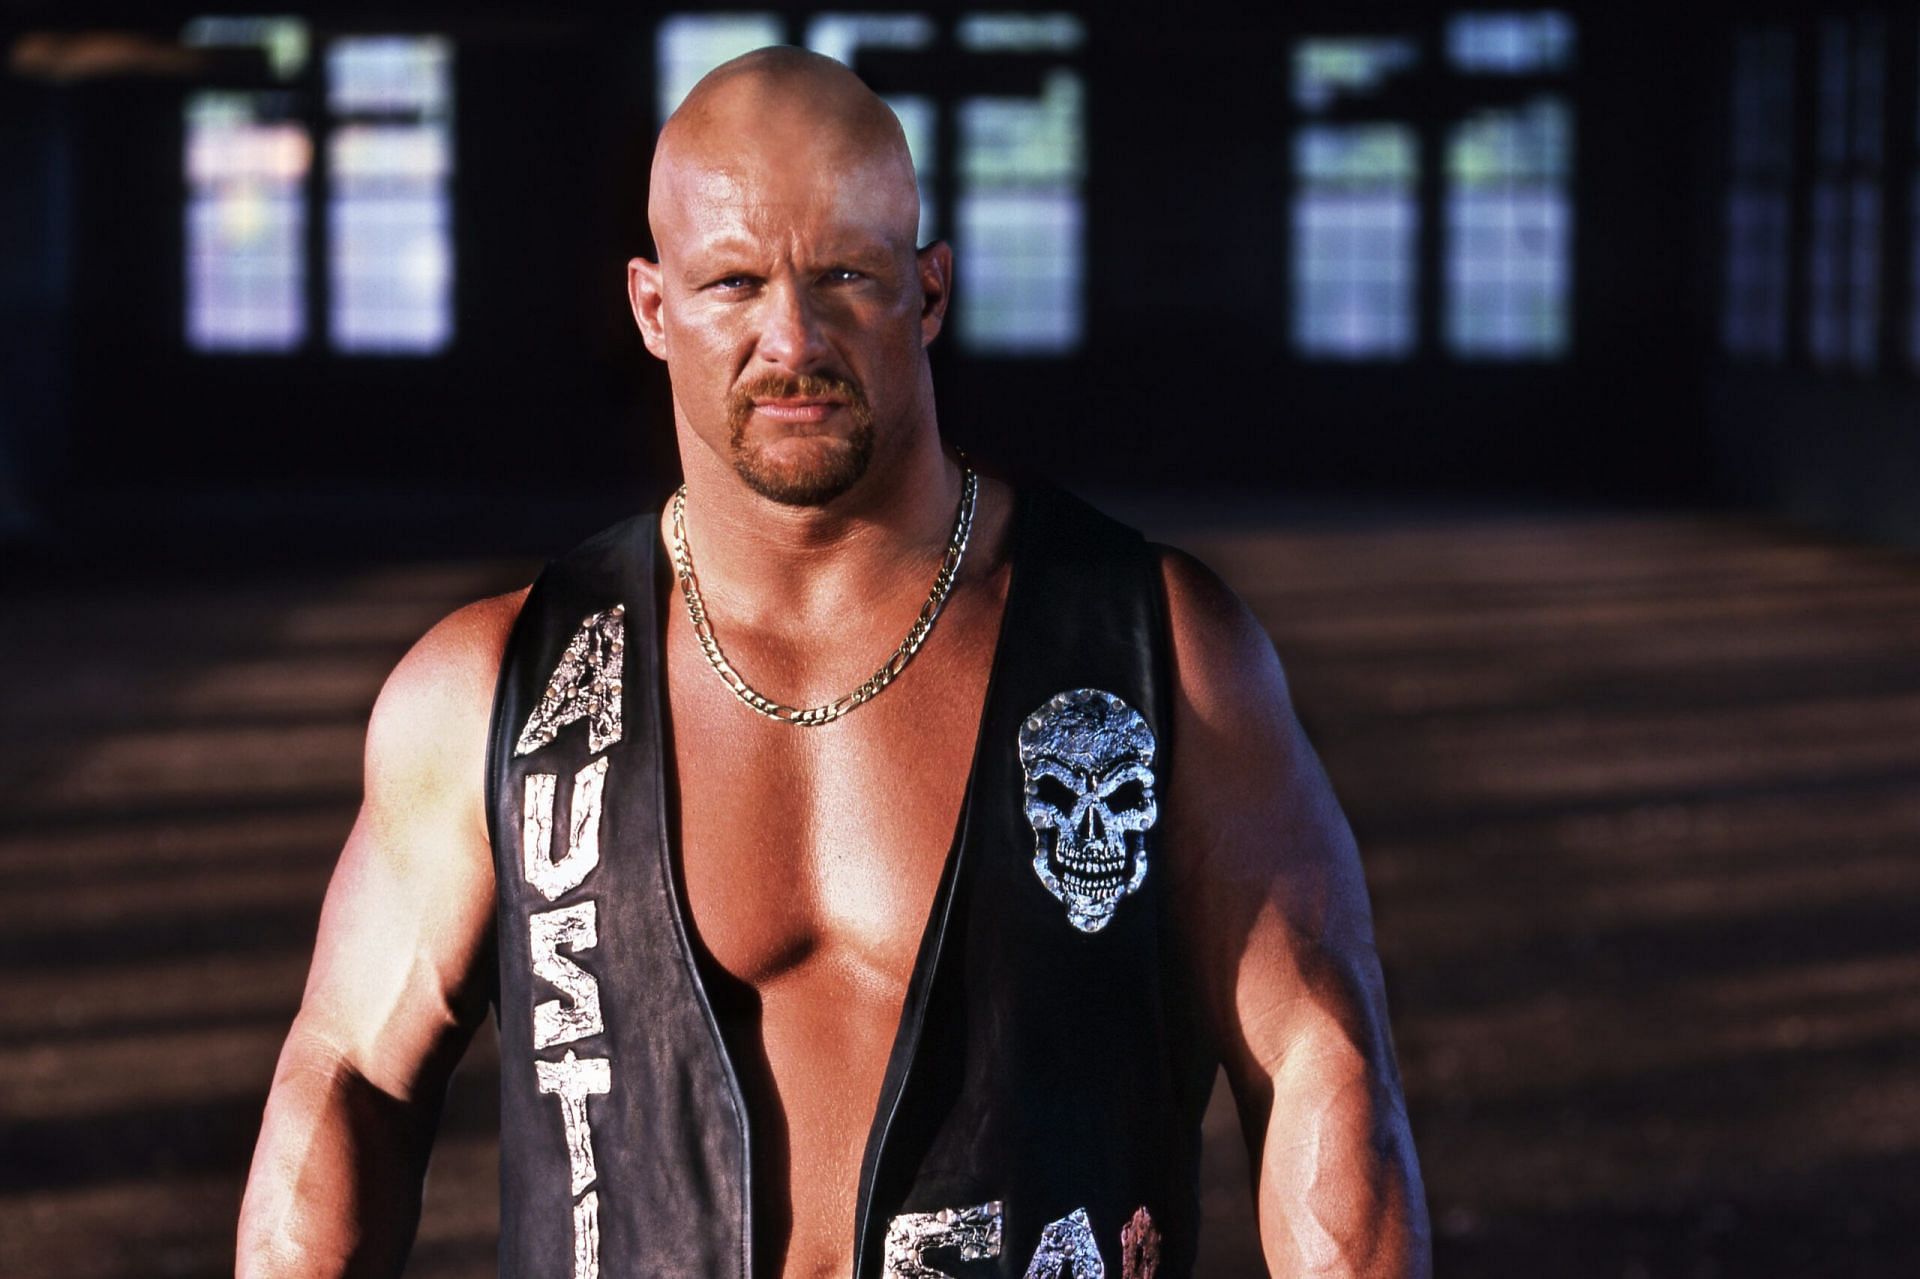 Stone Cold is the most popular star of all time